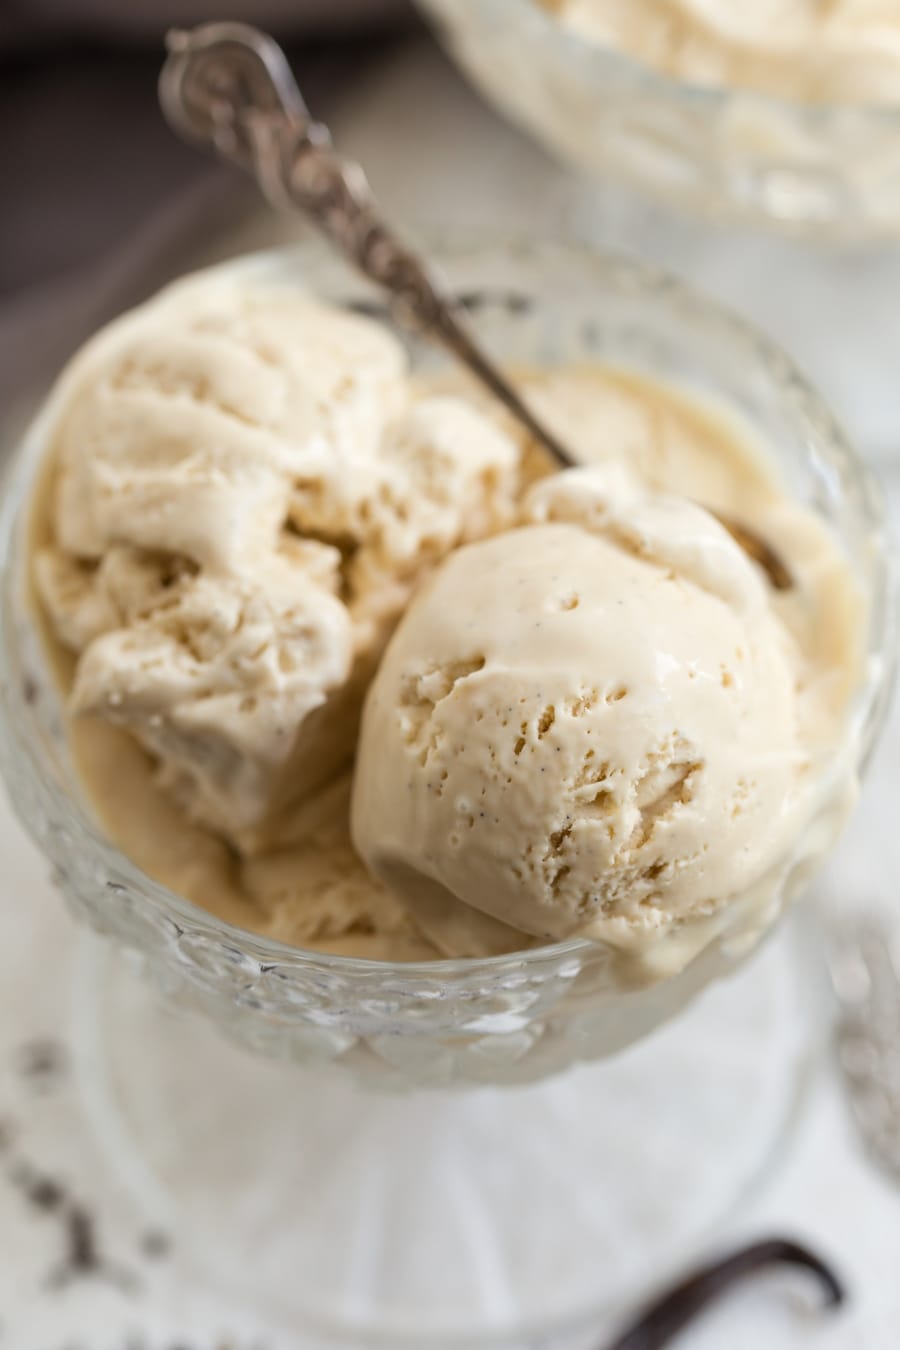 Closeup of London fog ice cream, portioned in a glass bowl.